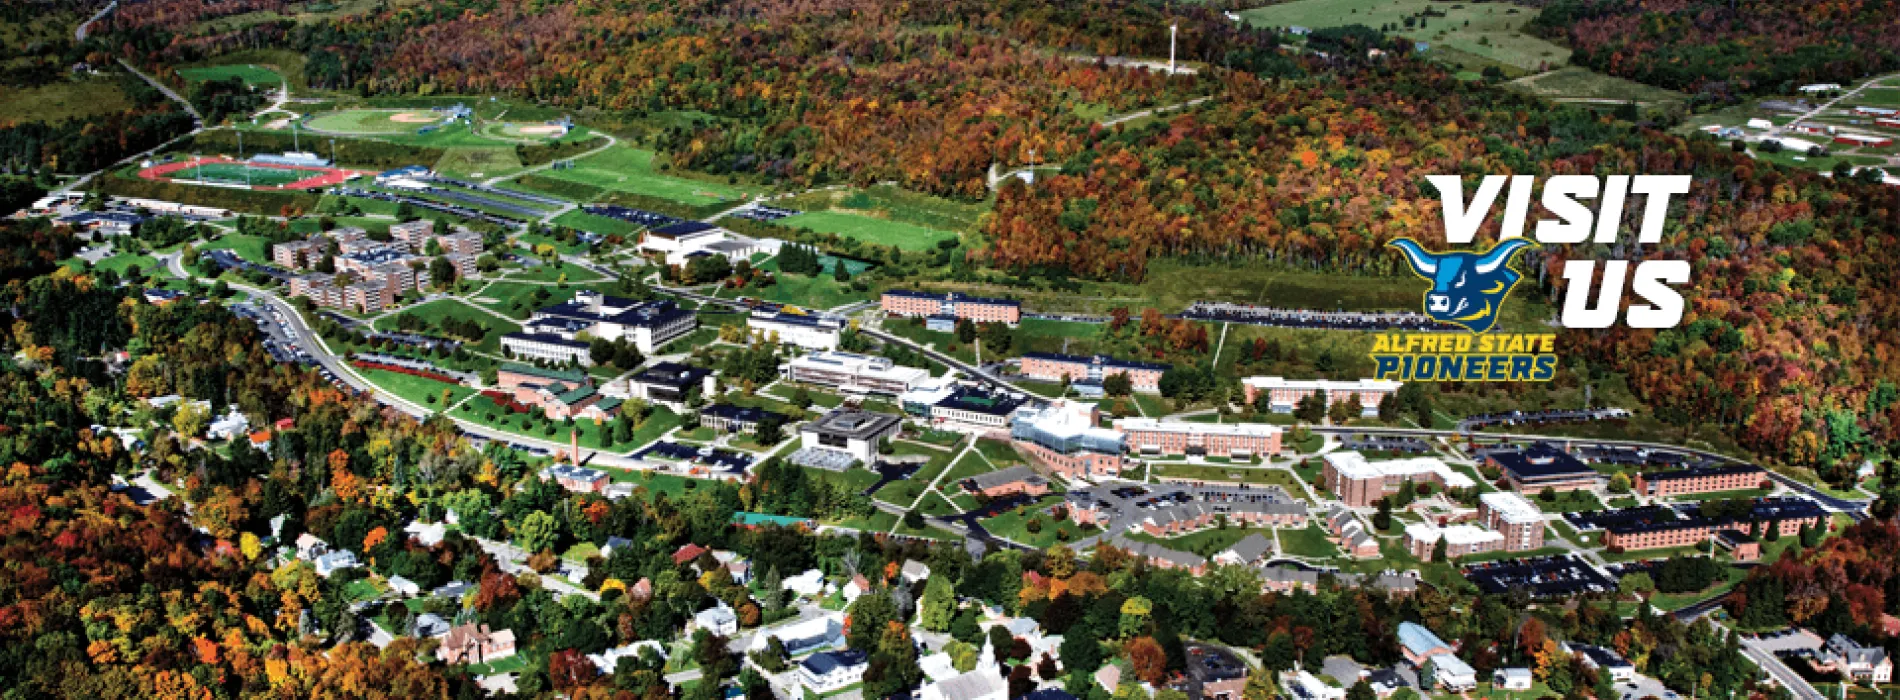 Link to visit us page. Image of Alfred State Pioneers mascot ox head and arial view of campus with foliage.